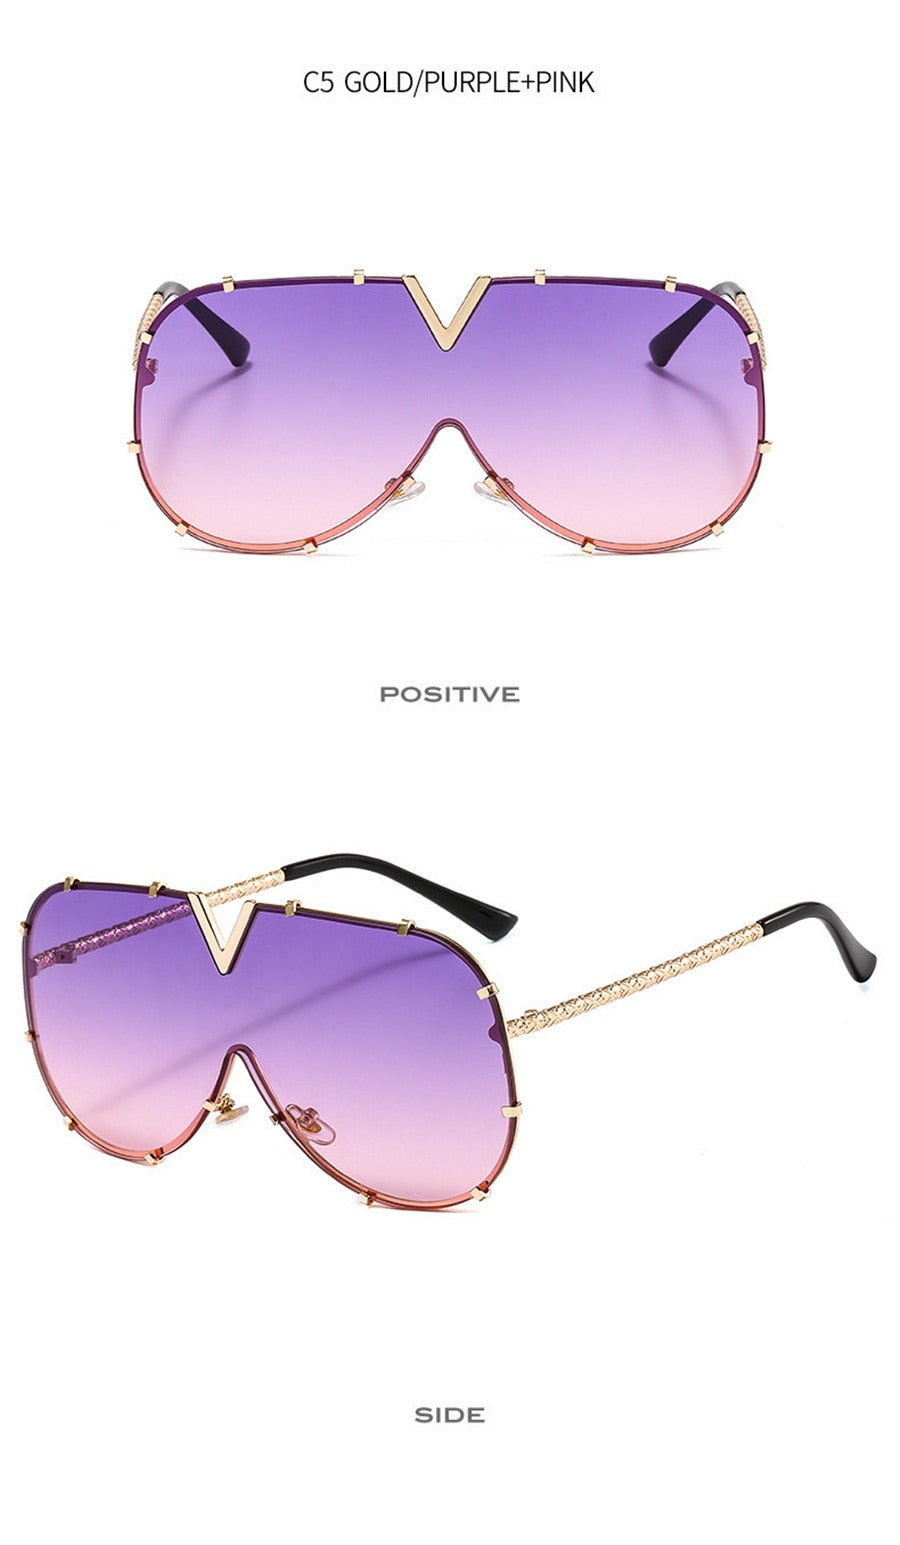 Chic and Timeless Square Sunglasses with a Retro Twist